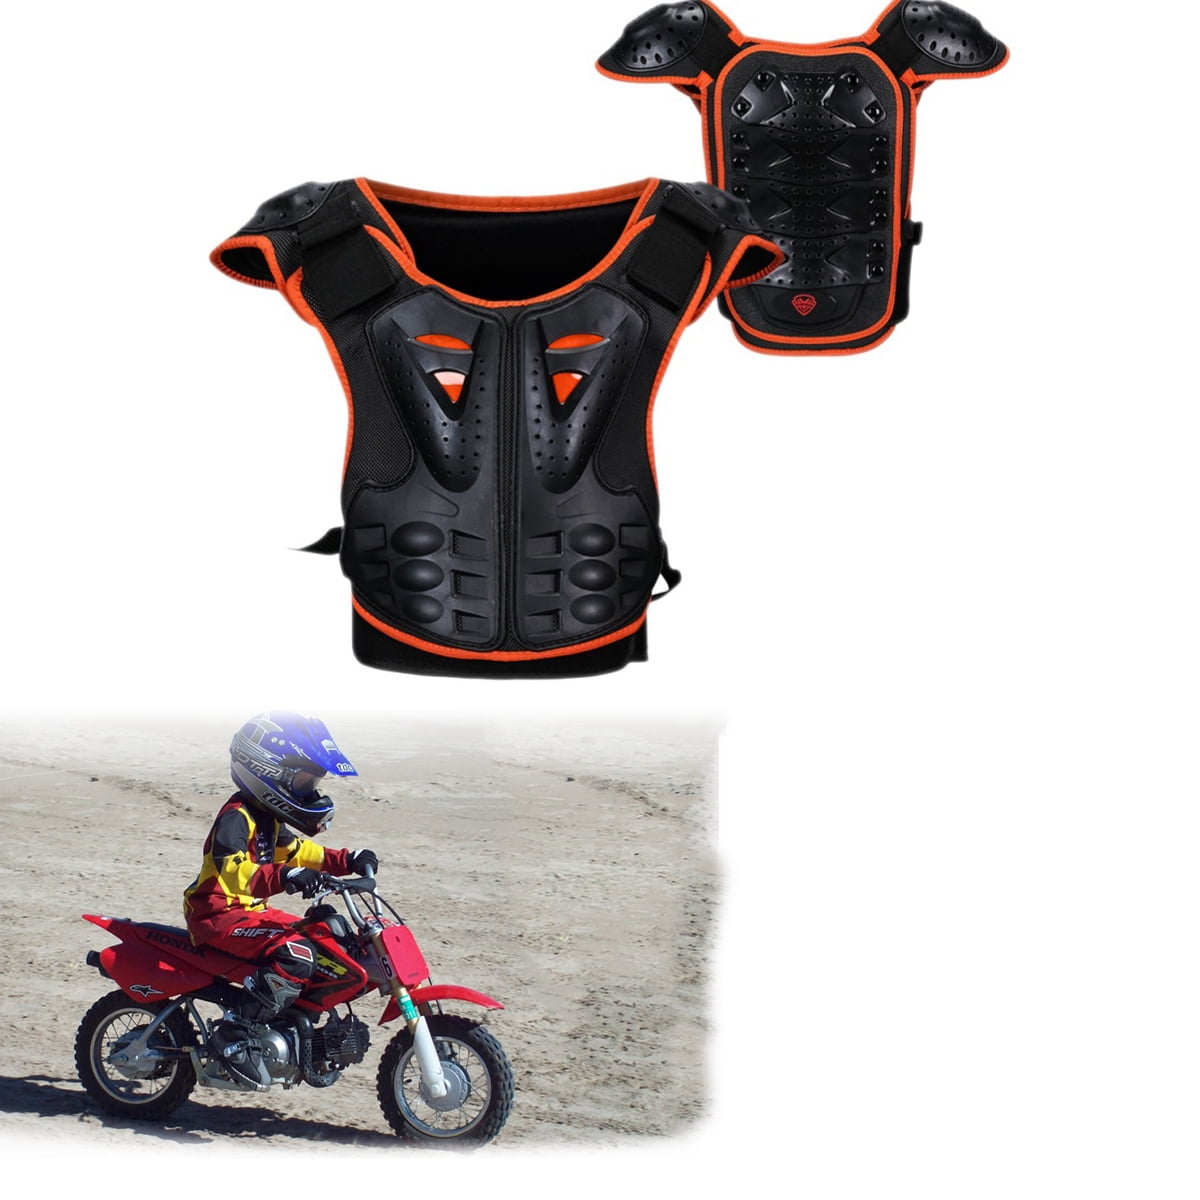 Kids Motorcycle Armor Suit Dirt Bike Gear Riding Protective Gear Chest Protection for Motocross Cycling Skateboard,Skiing,Skating,Off-road Blue